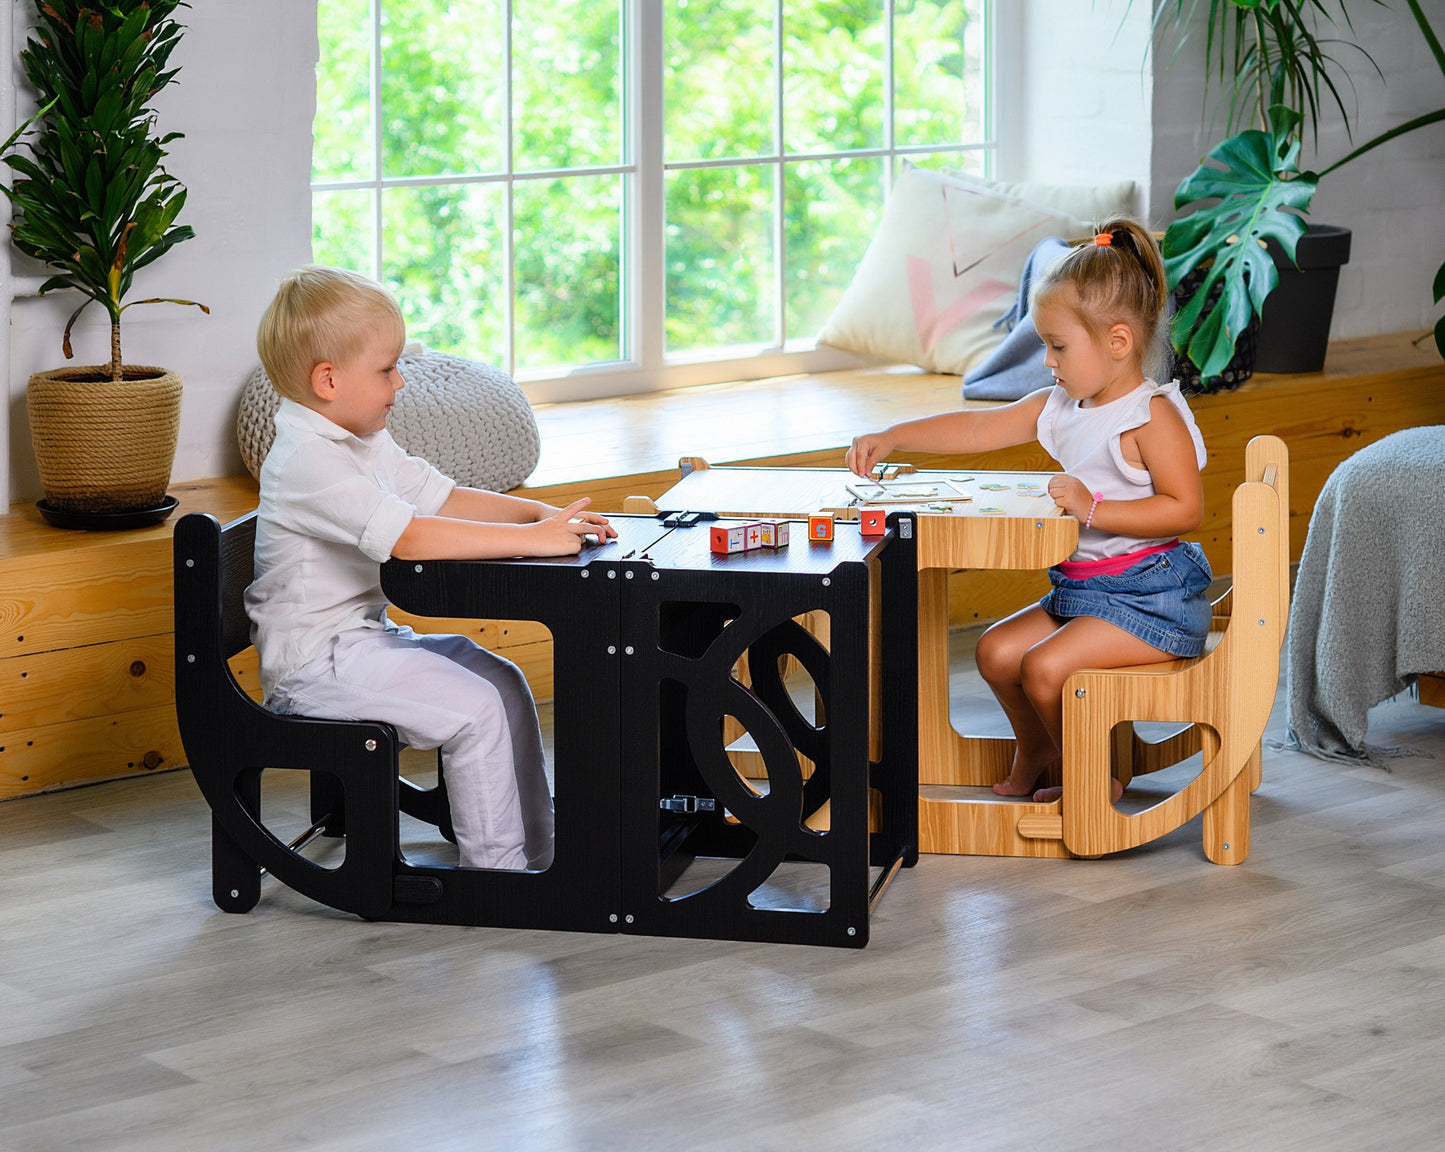 Convertible learning toddler tower table 2 in 1, kitchen helper stool - Climbambino